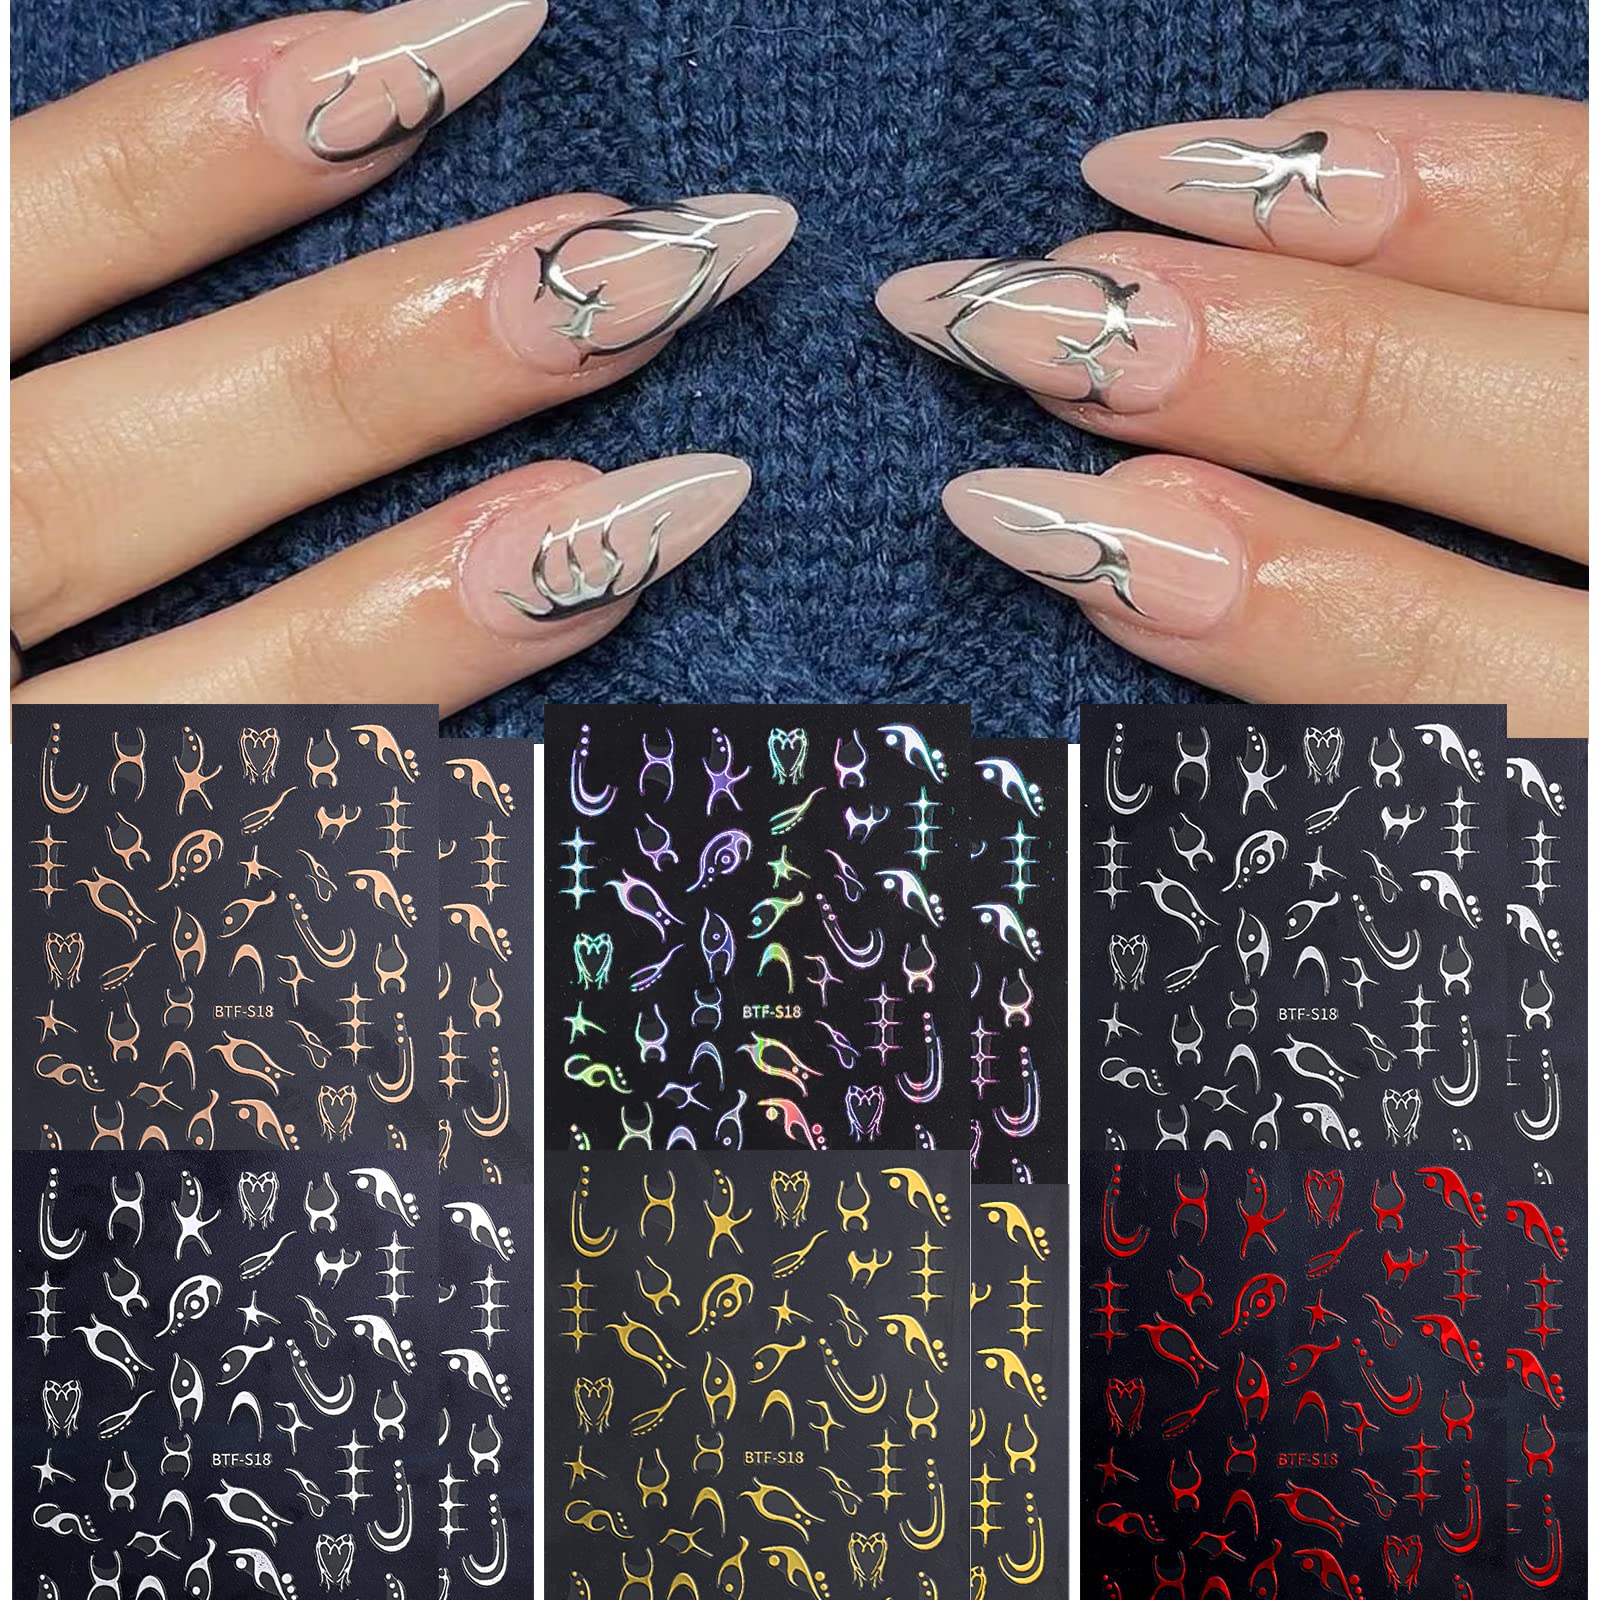 Silver Nail Art Stickers